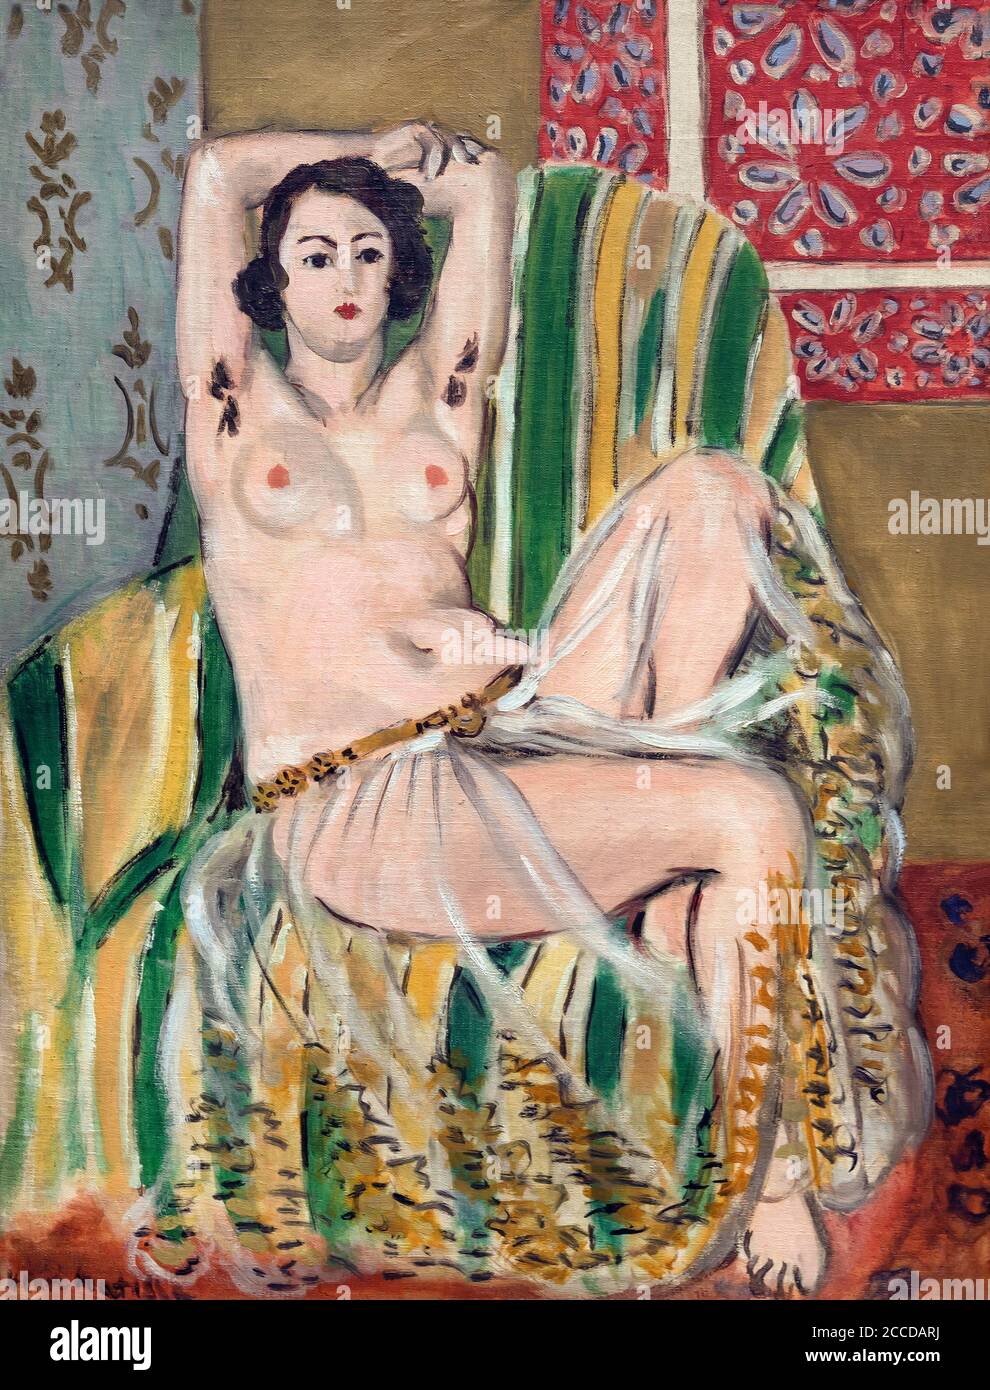 Odalisque Seated with Arms Raised, Green Striped Chair, Henri Matisse, 1923, National Gallery of Art, Washington DC, USA, North America Stock Photo